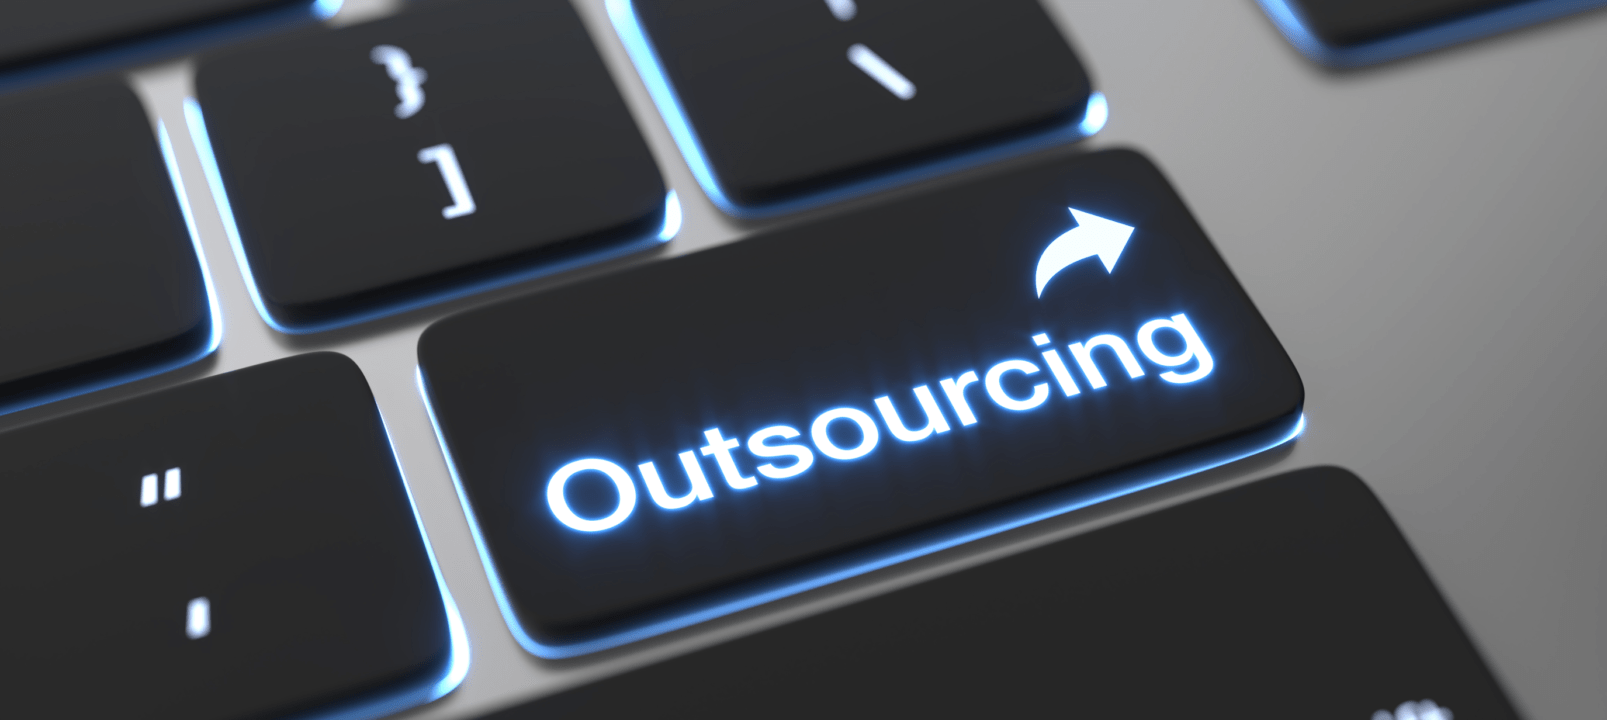 Outsourcing Programming: Highlighting Strengths and Weaknesses